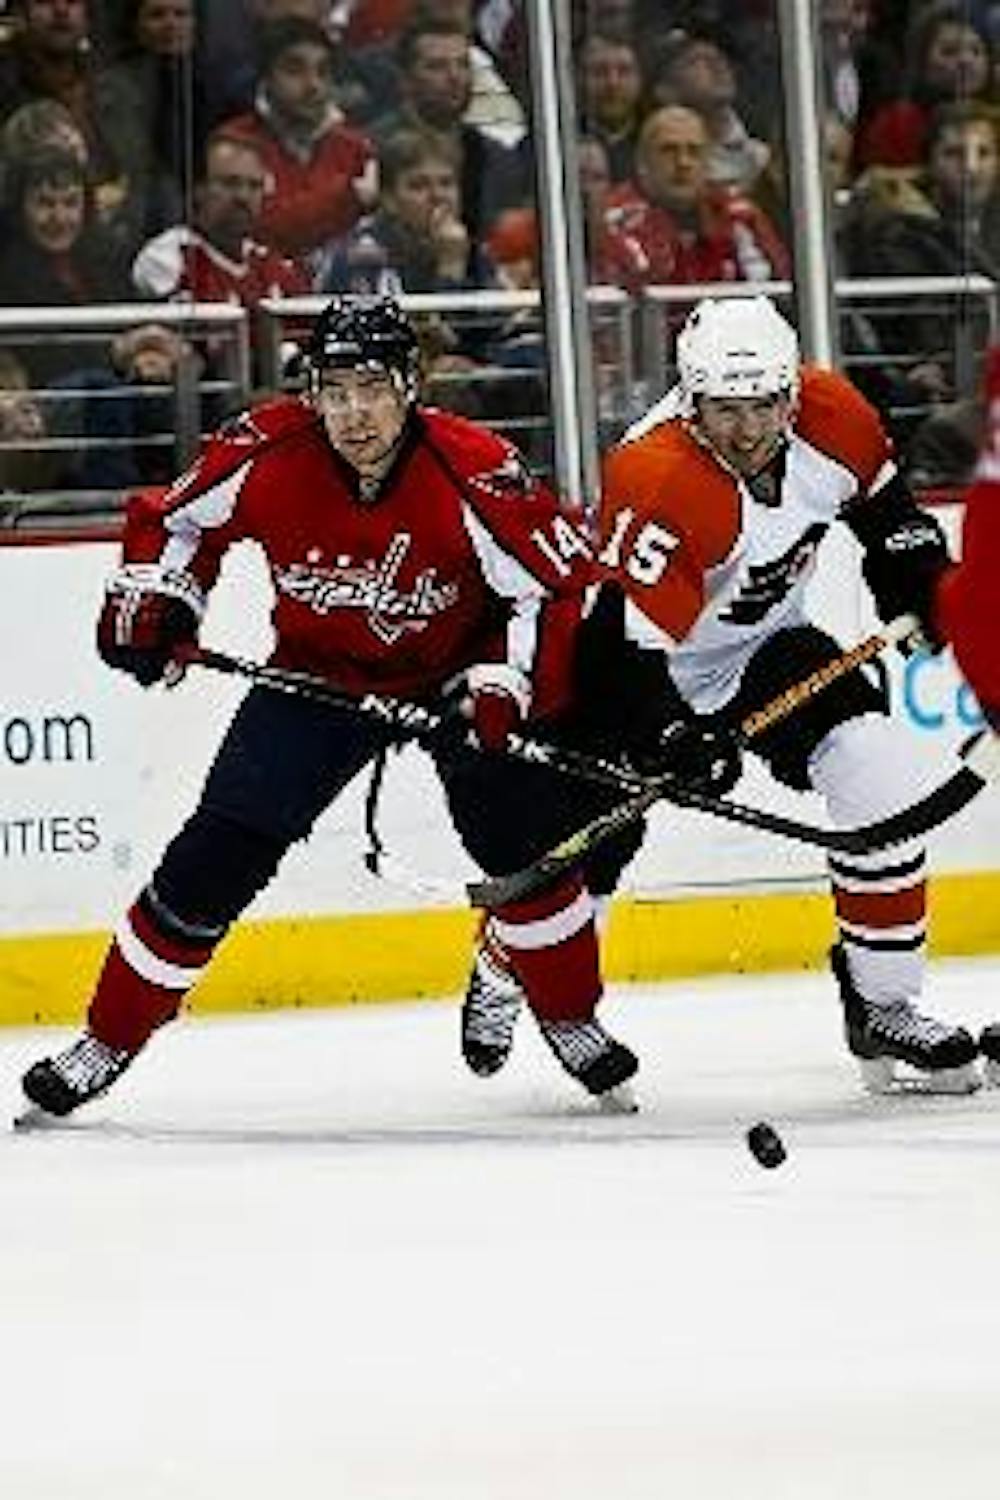 CHASING DOWN A WIN - Washington Capitals forward Tomas Fleischmann races for the puck during a Capitals home game against the Philadelphia Flyers earlier in the season. The Capitals came from behind to beat the Flyers several times this year and hope to d